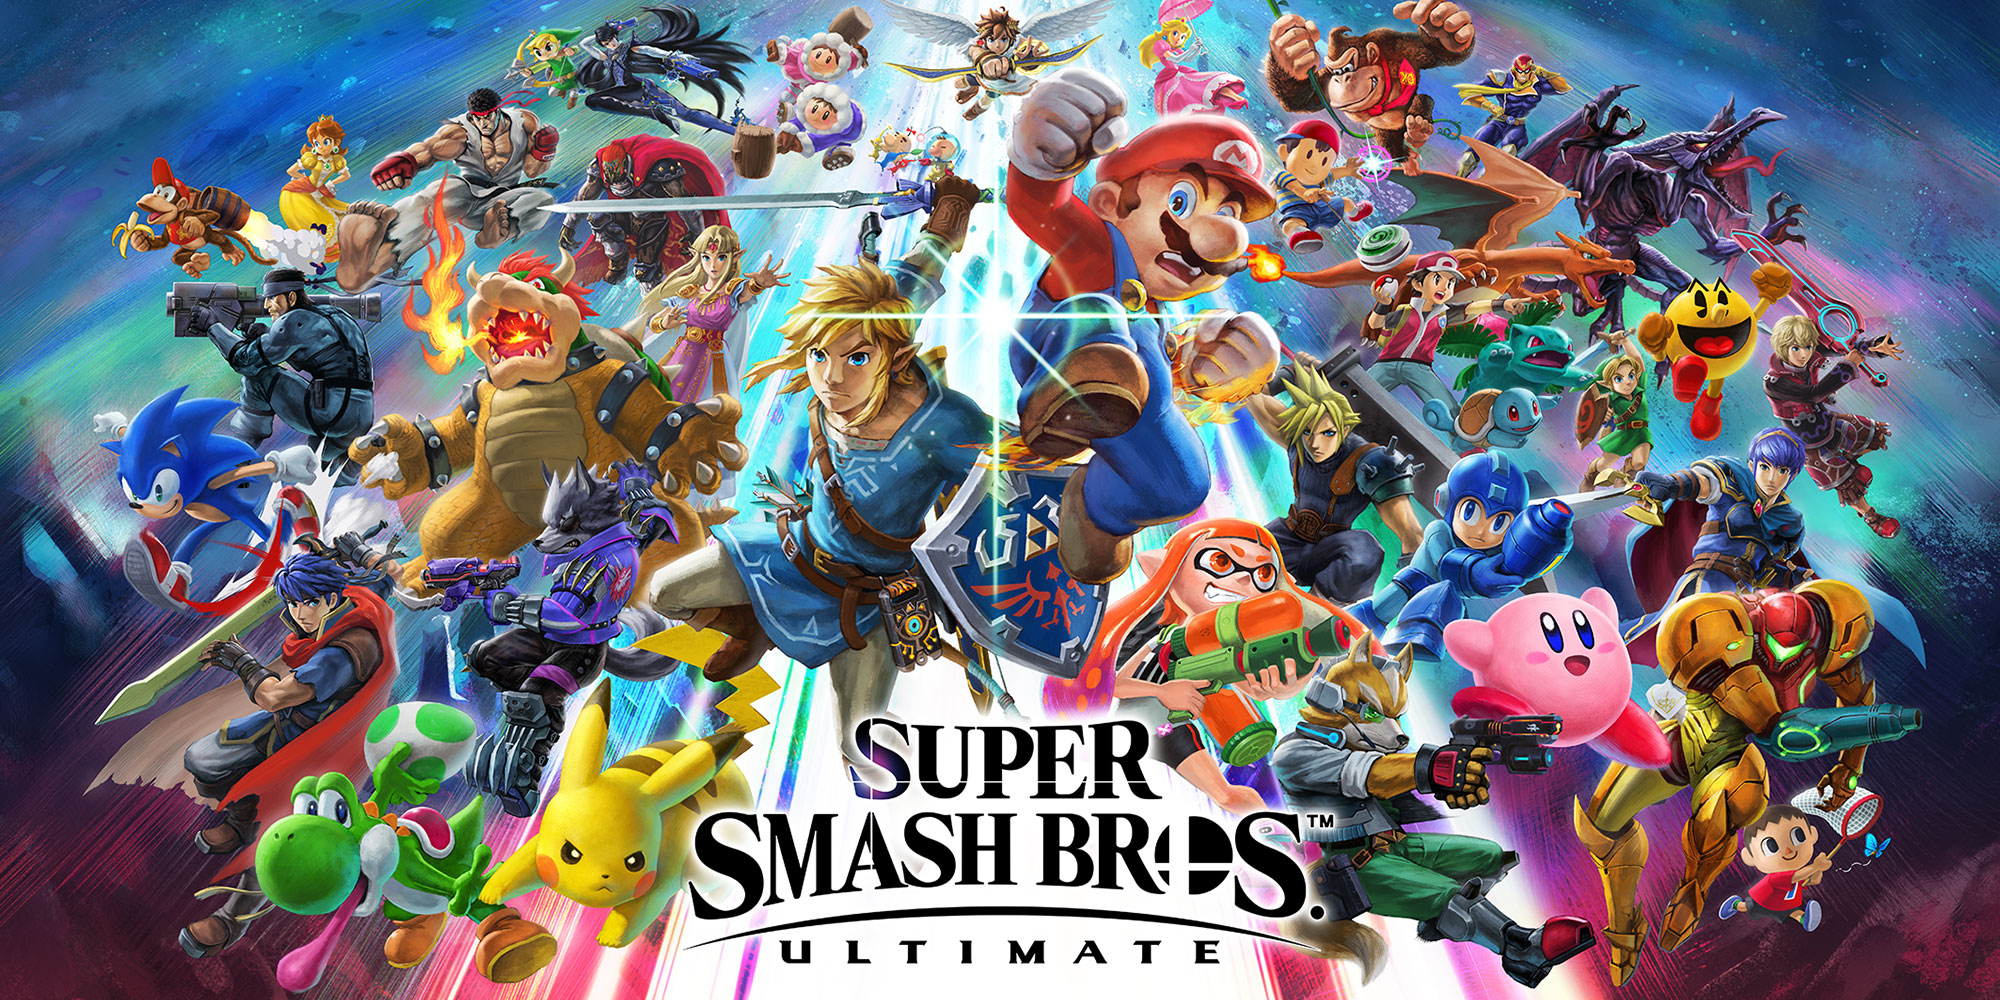 New Super Smash Bros. Ultimate DLC fighters are on the way: Banjo & Kazooie and Dragon Quest’s Hero!